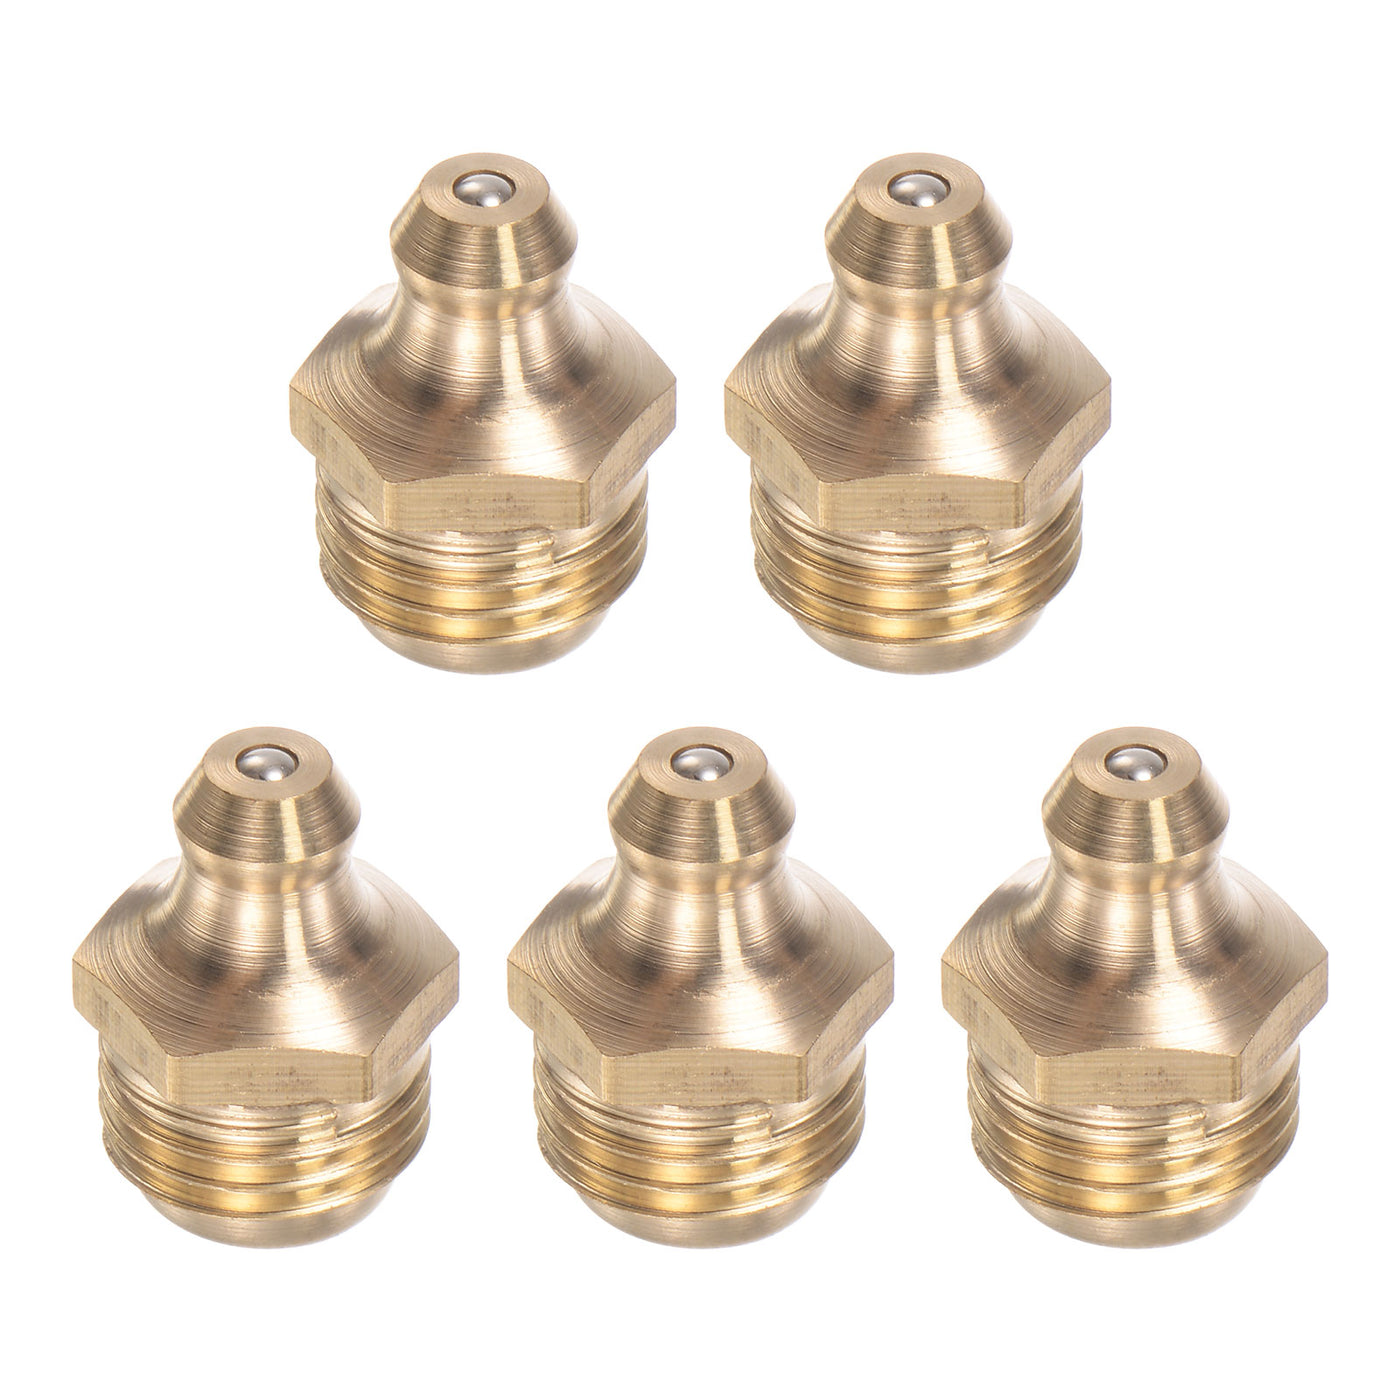 Uxcell Uxcell Brass Straight Hydraulic Grease Fitting Accessories M12 x 1.5mm Thread, 5Pcs